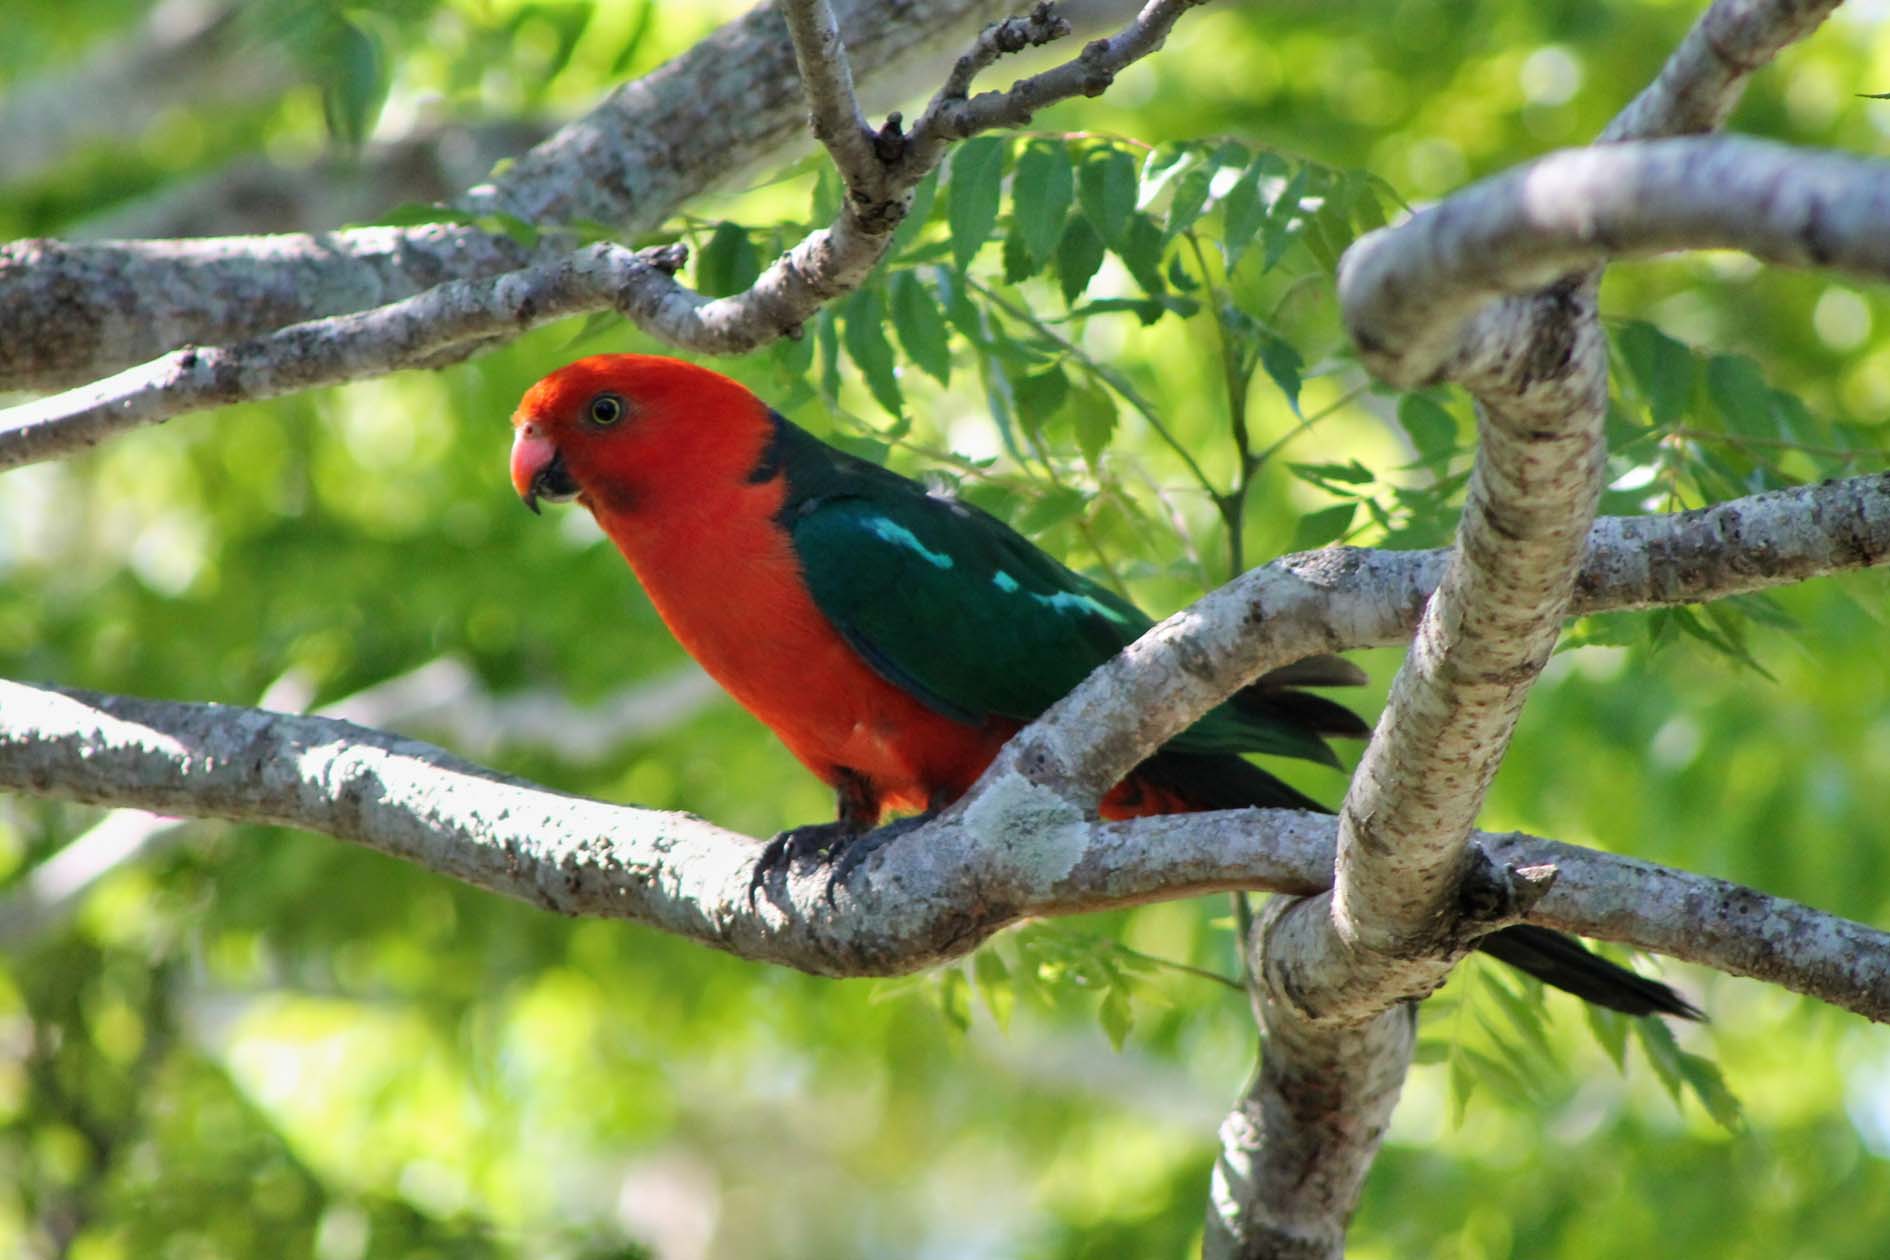 King parrot Image by Denise Cullen